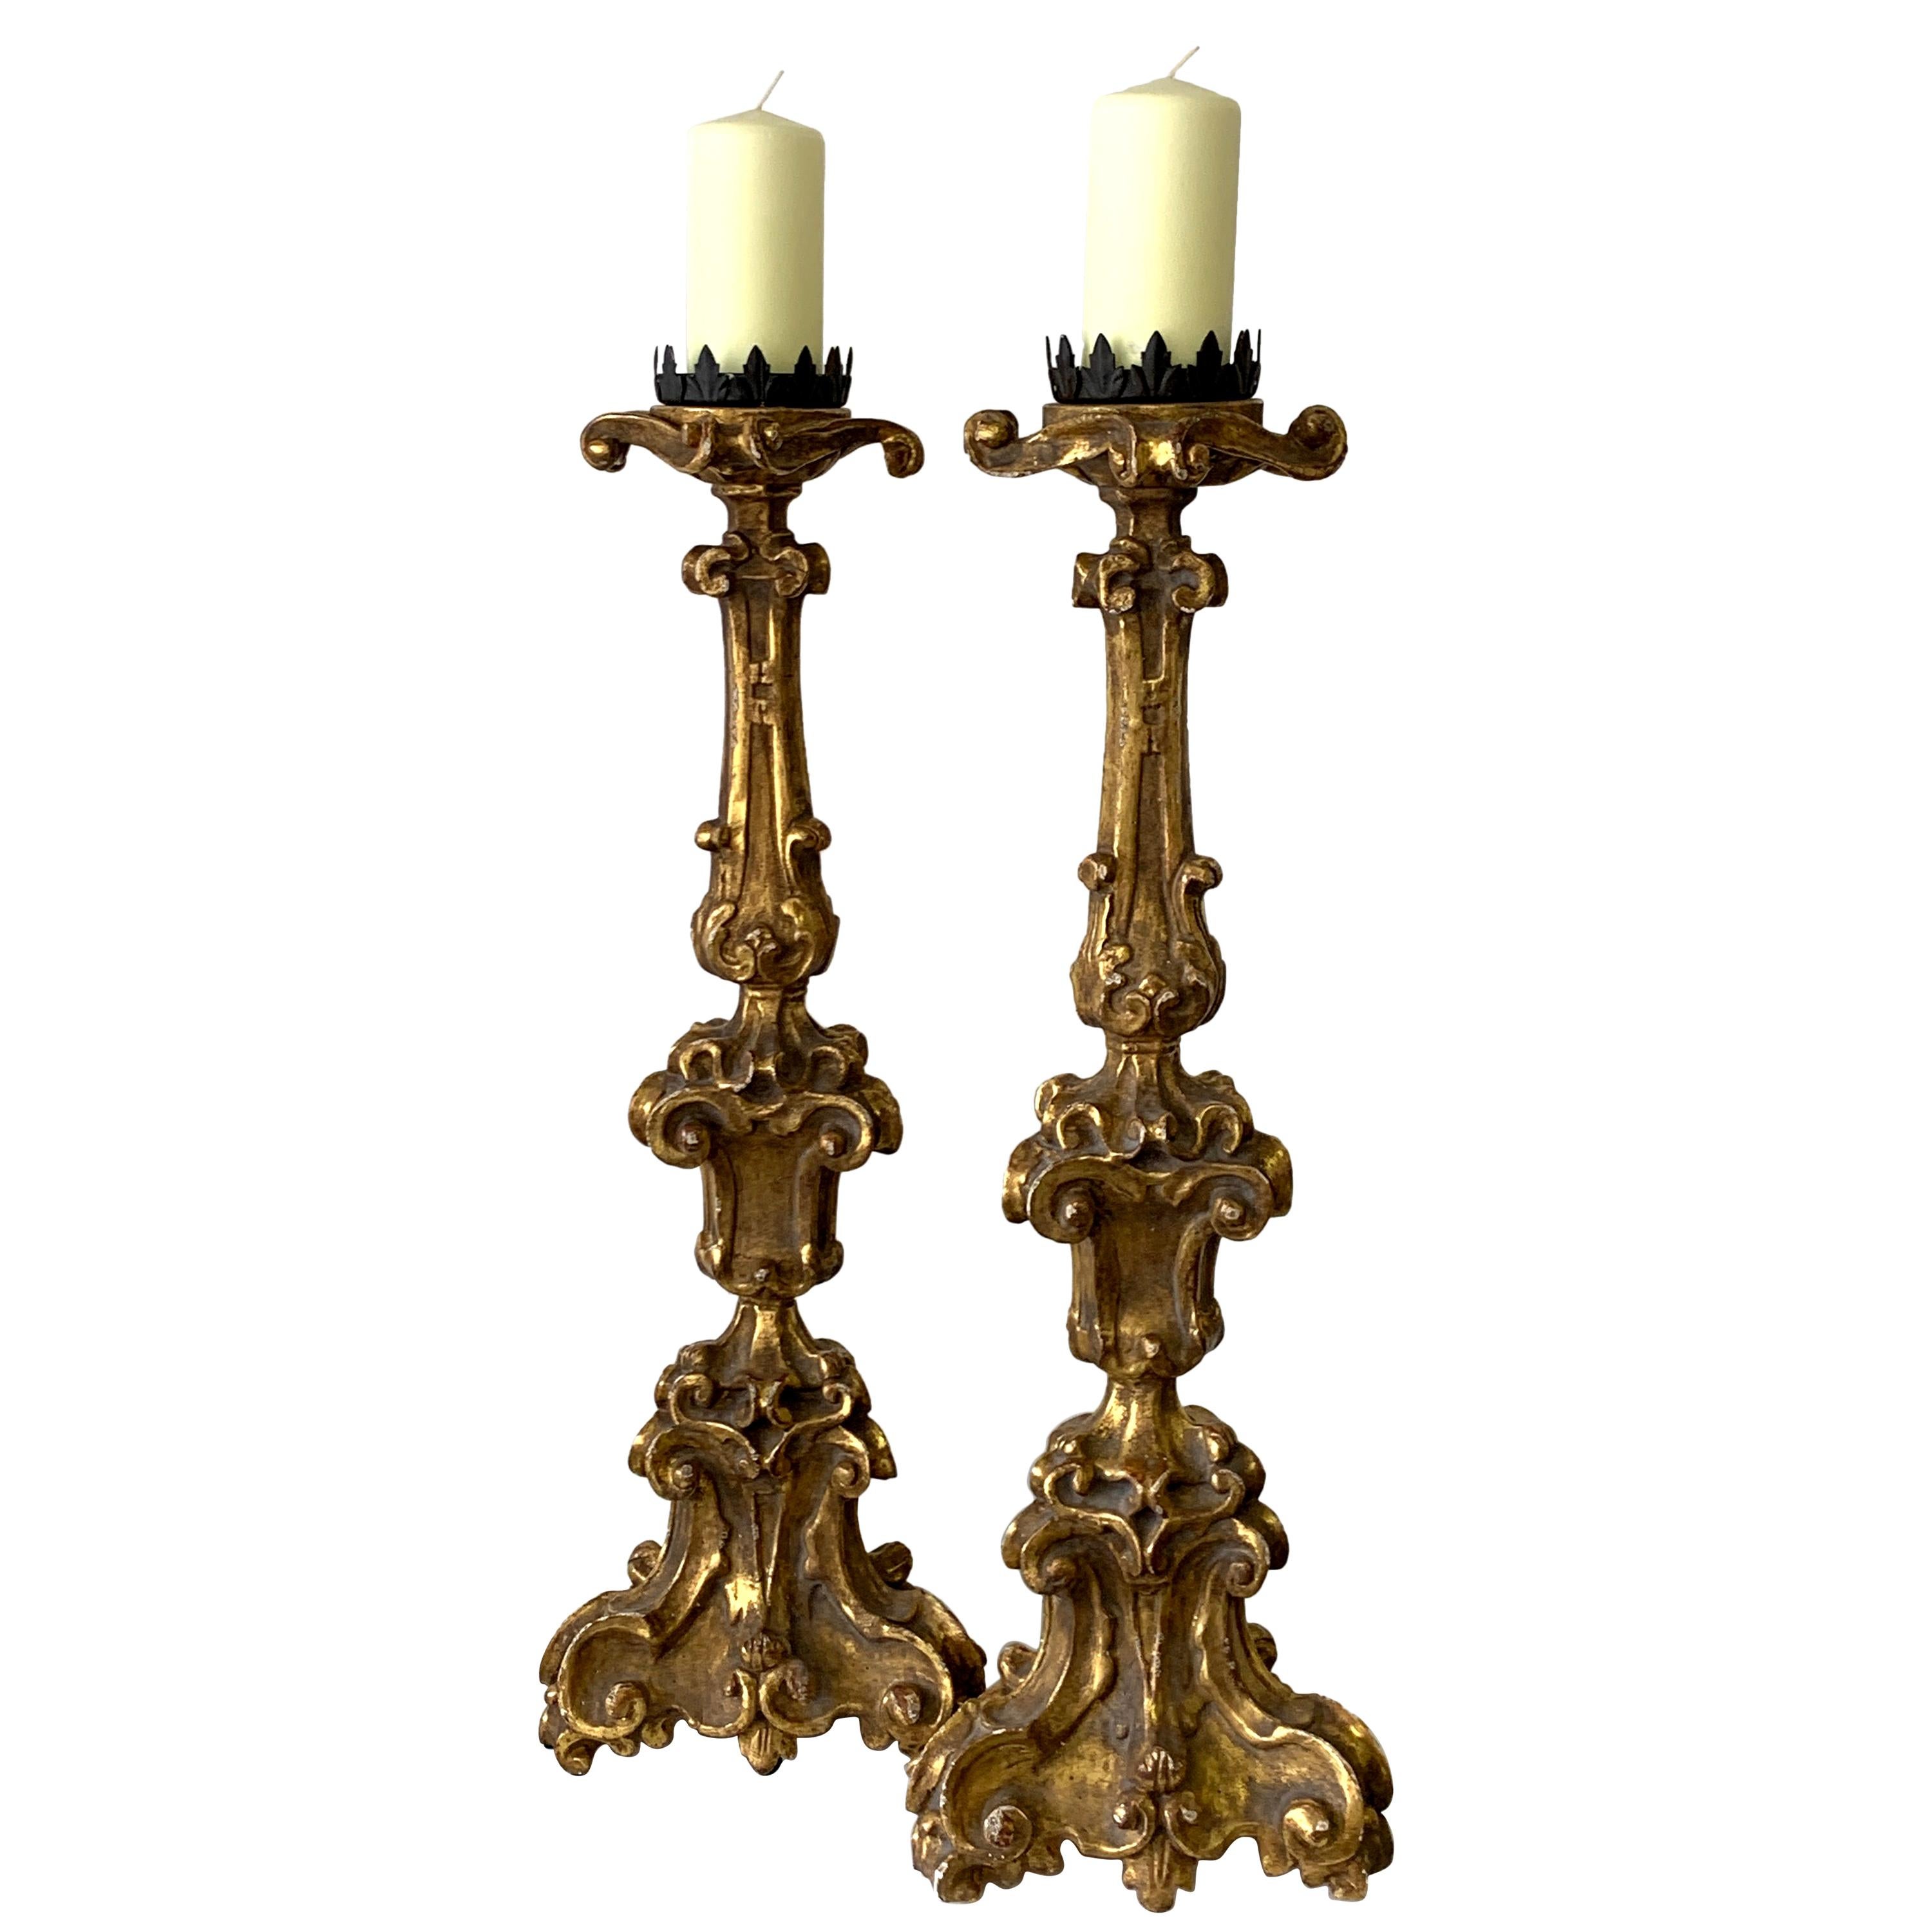 Pair of Baroque Style Carved Giltwood Pricket Candlesticks